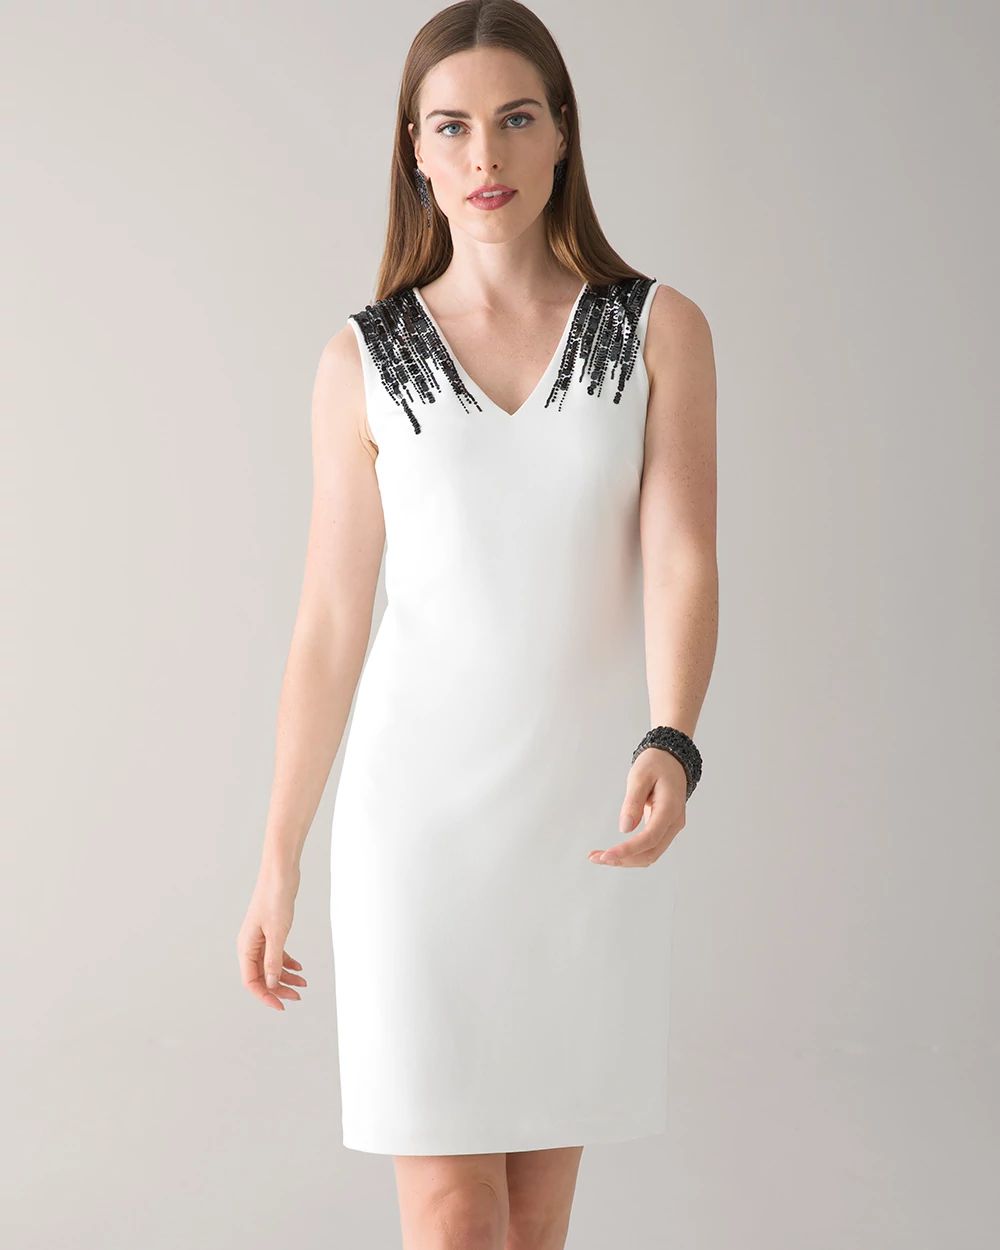 Petite Shift Dress with Embellished Shoulder click to view larger image.